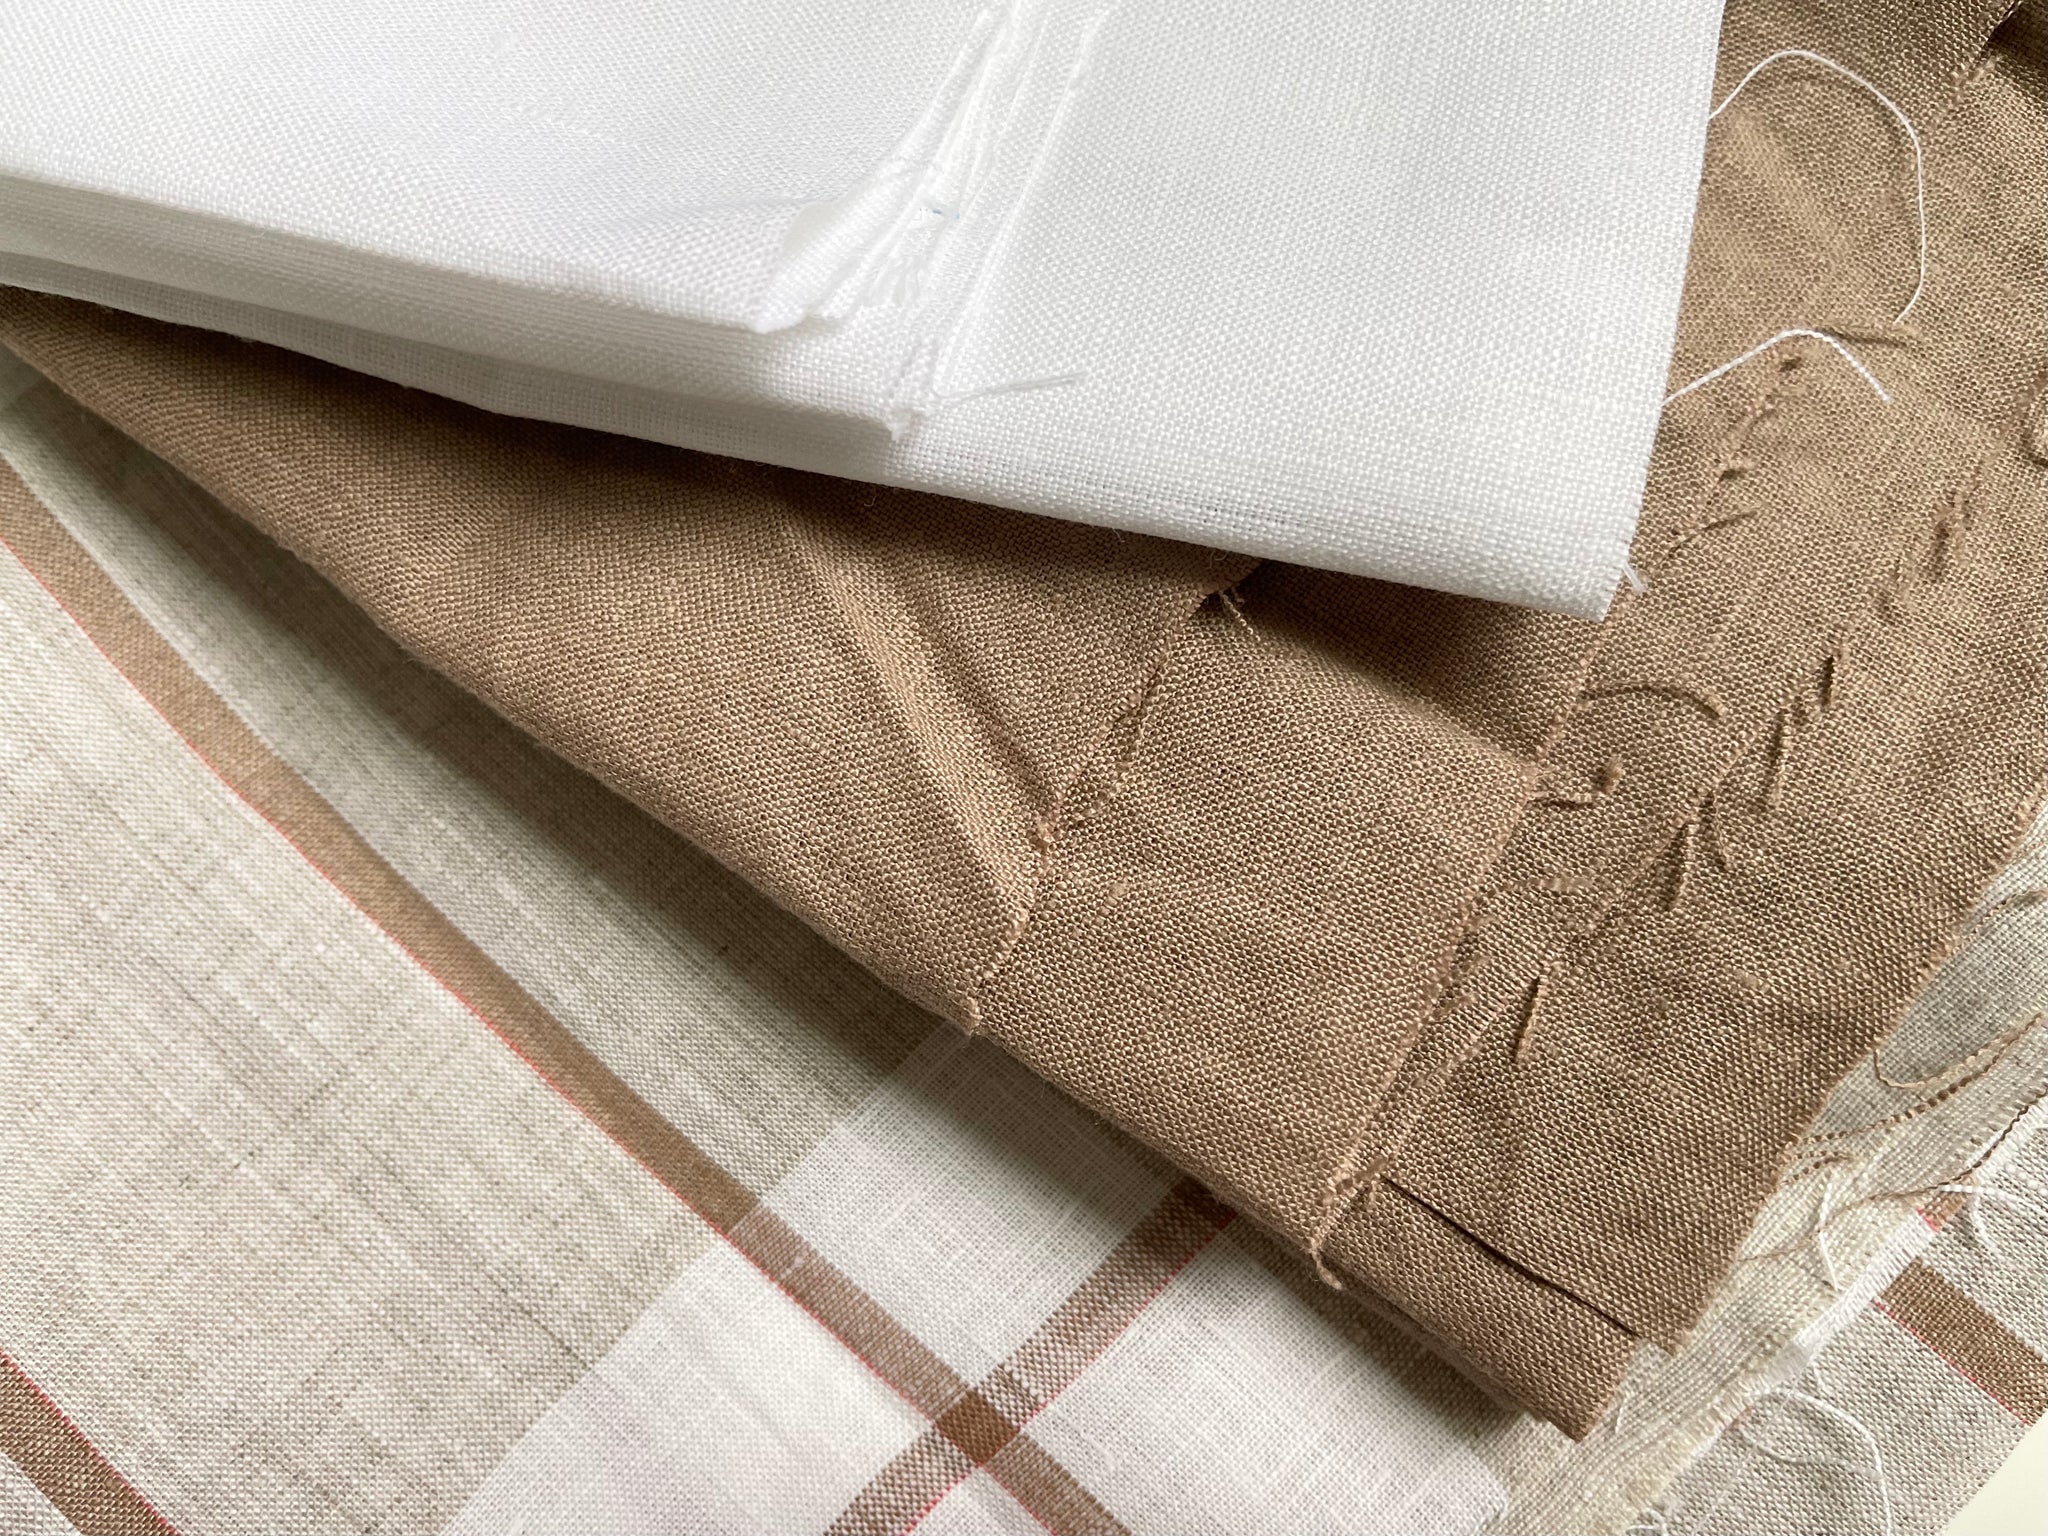 Linen Fabric Remnants - Pure White, Desert Clay, White Natural Plaid